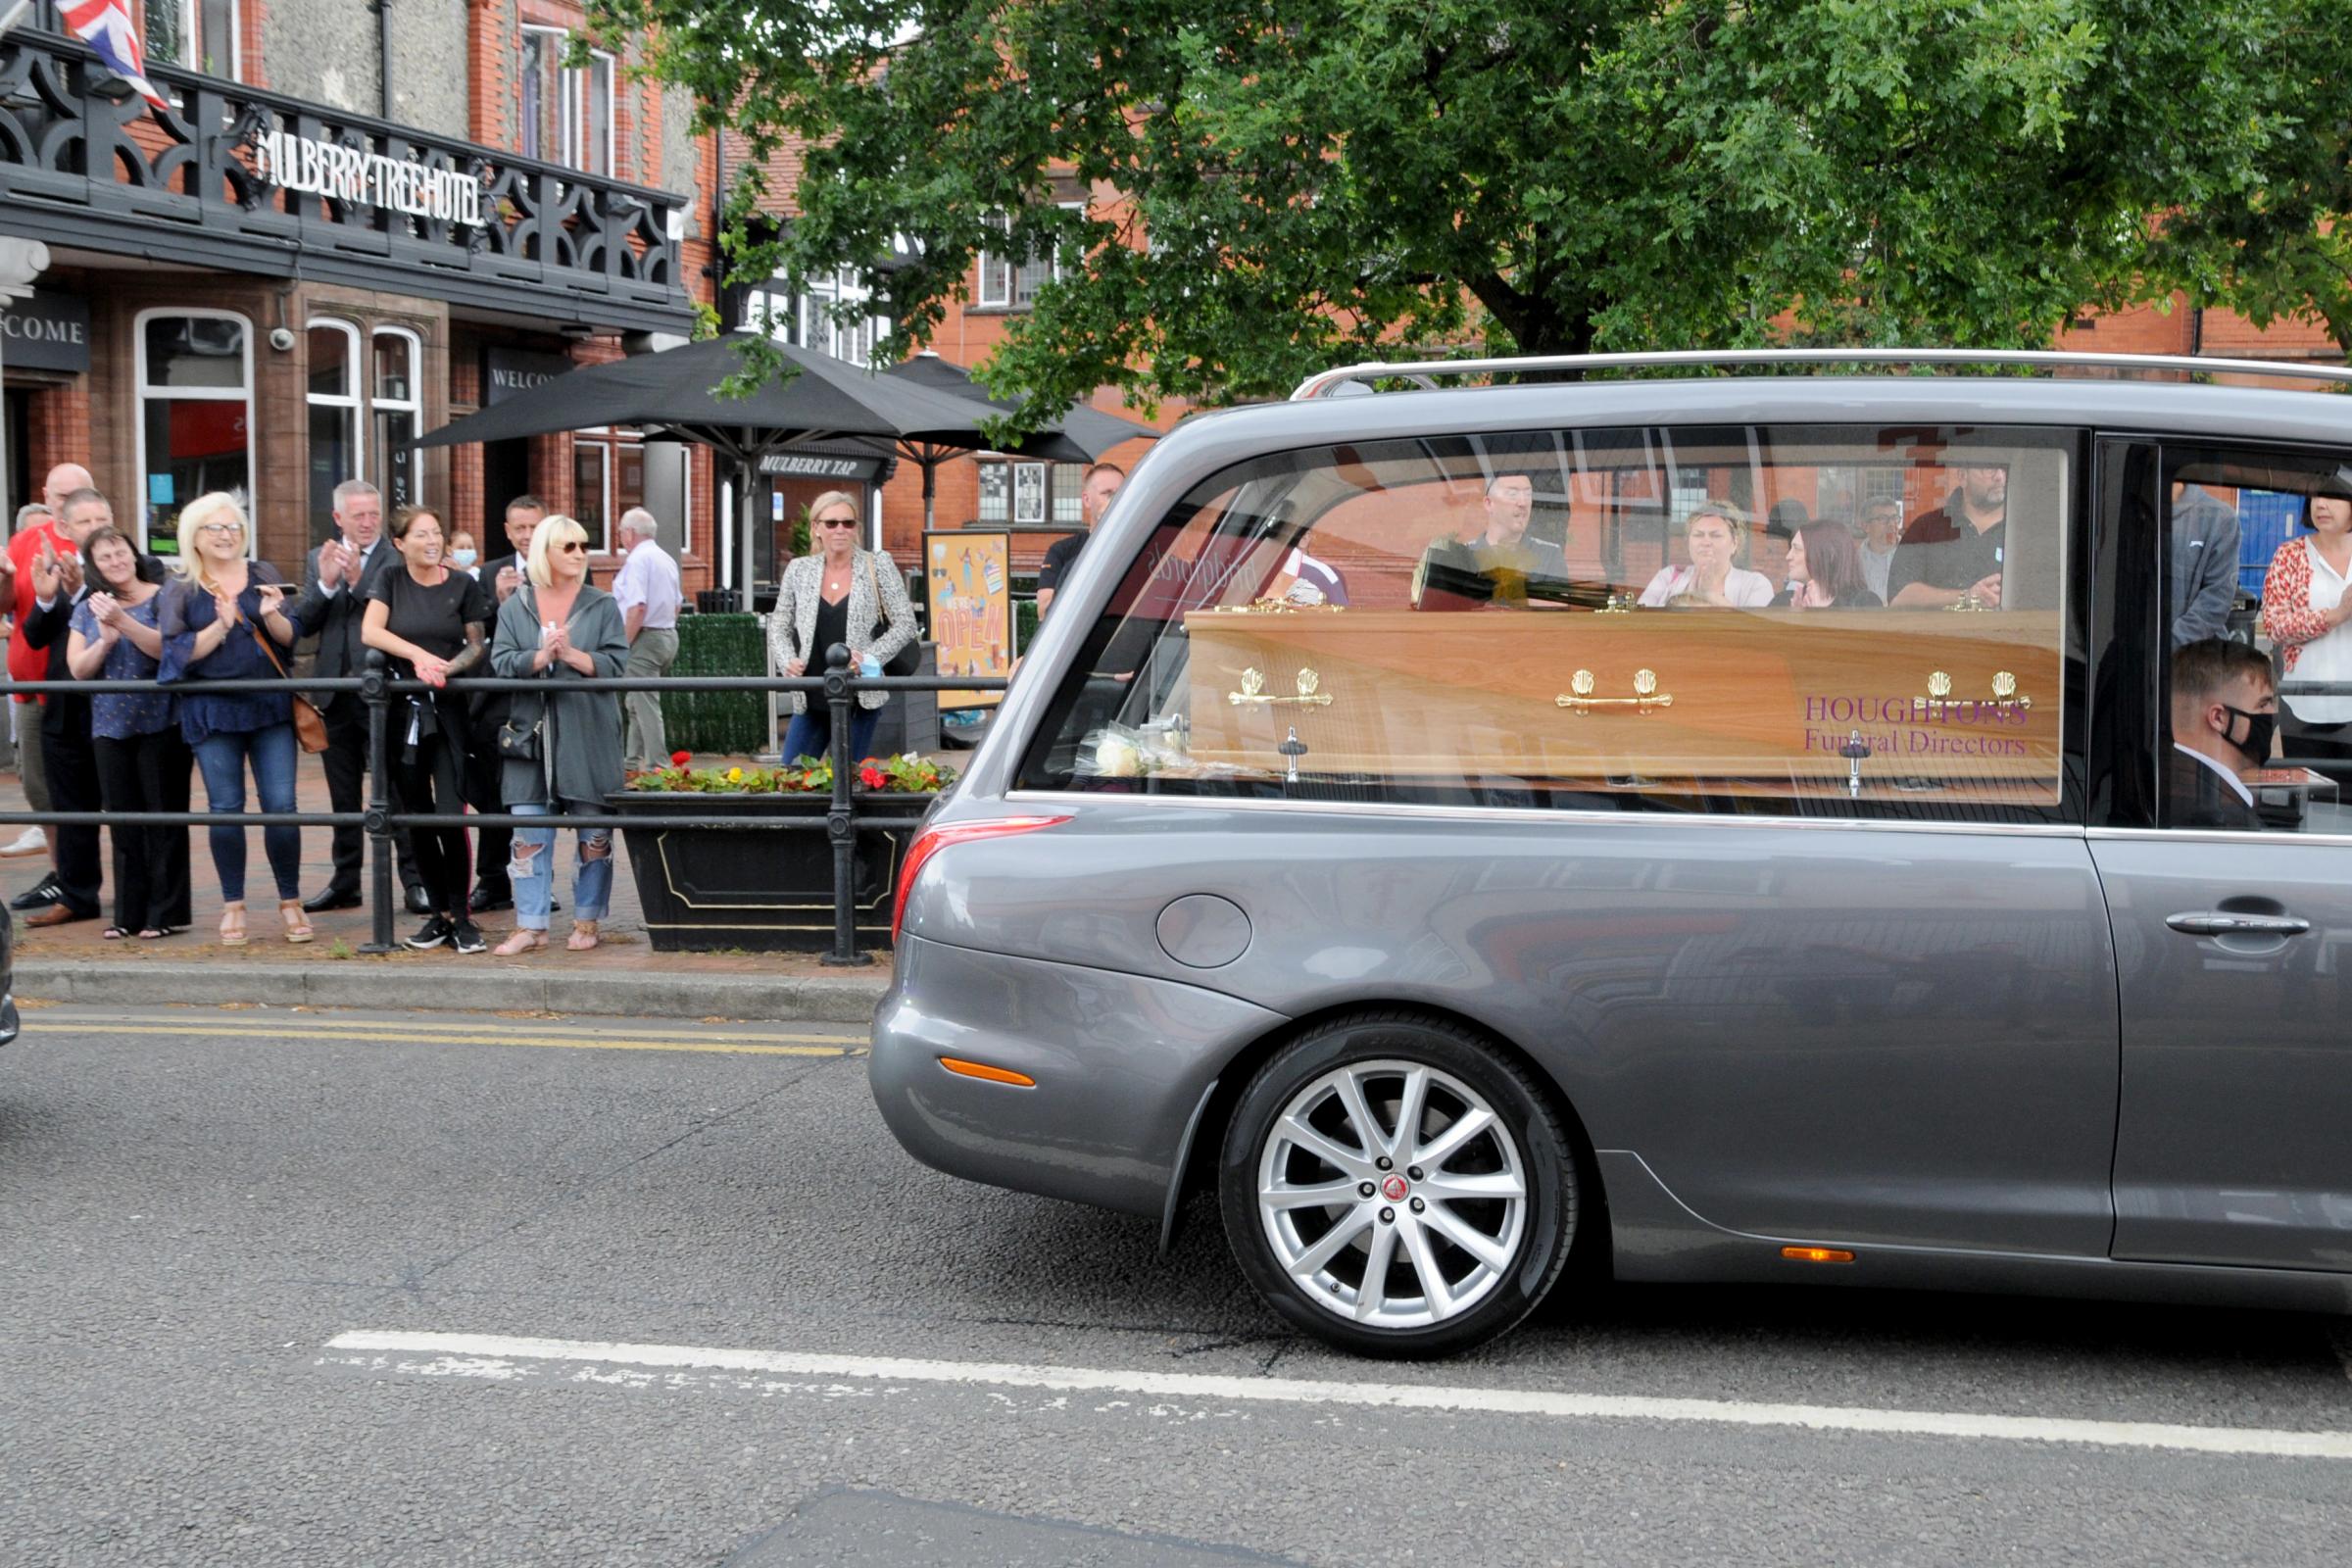 Chris Culletons funeral